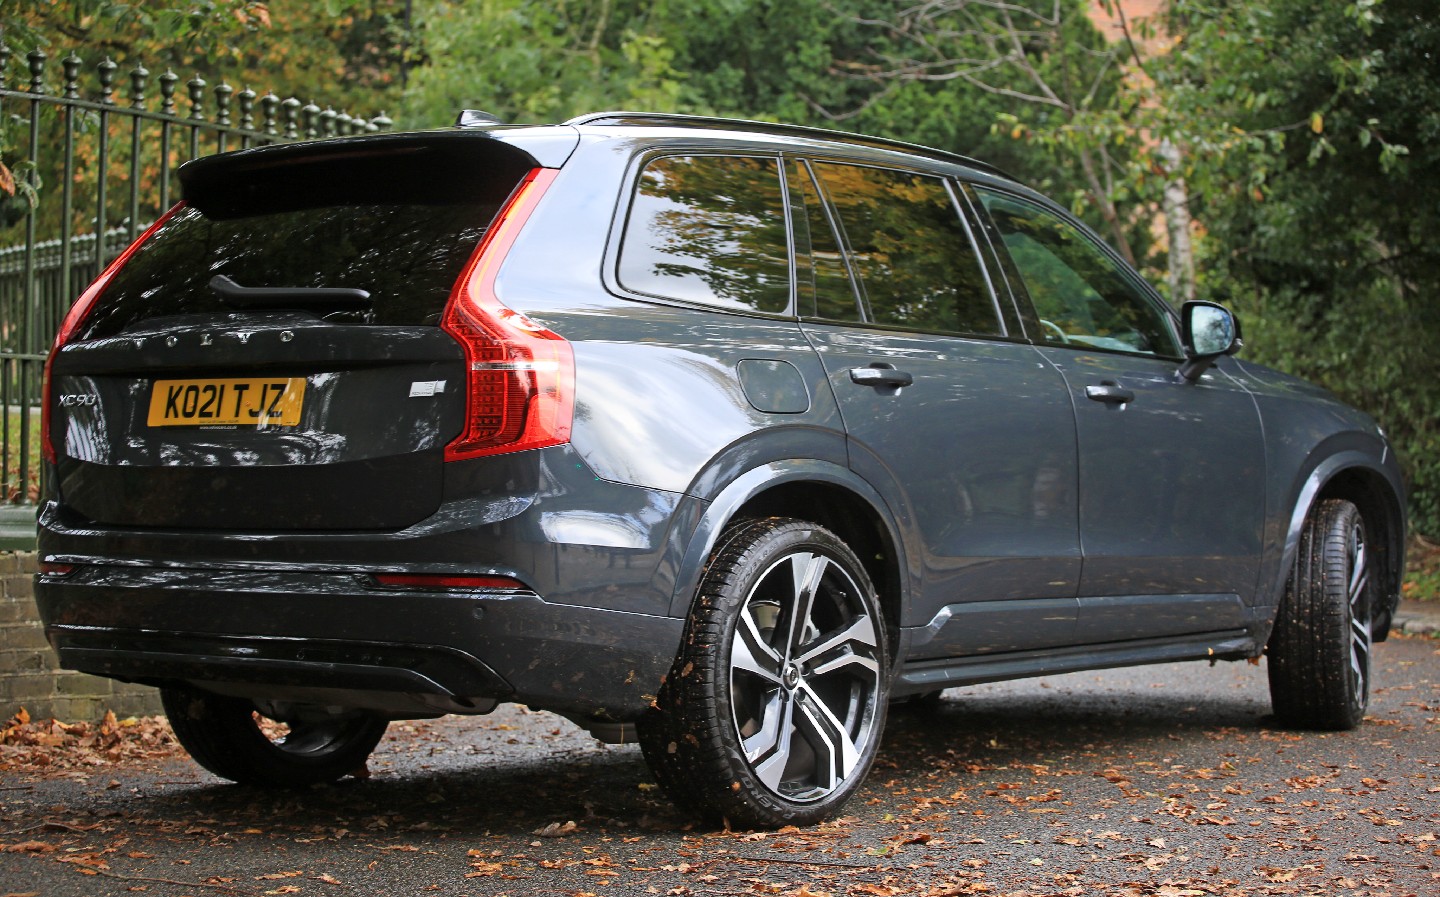 2021 Volvo XC90 Recharge long-term review by David Green for Sunday Times Driving.co.uk